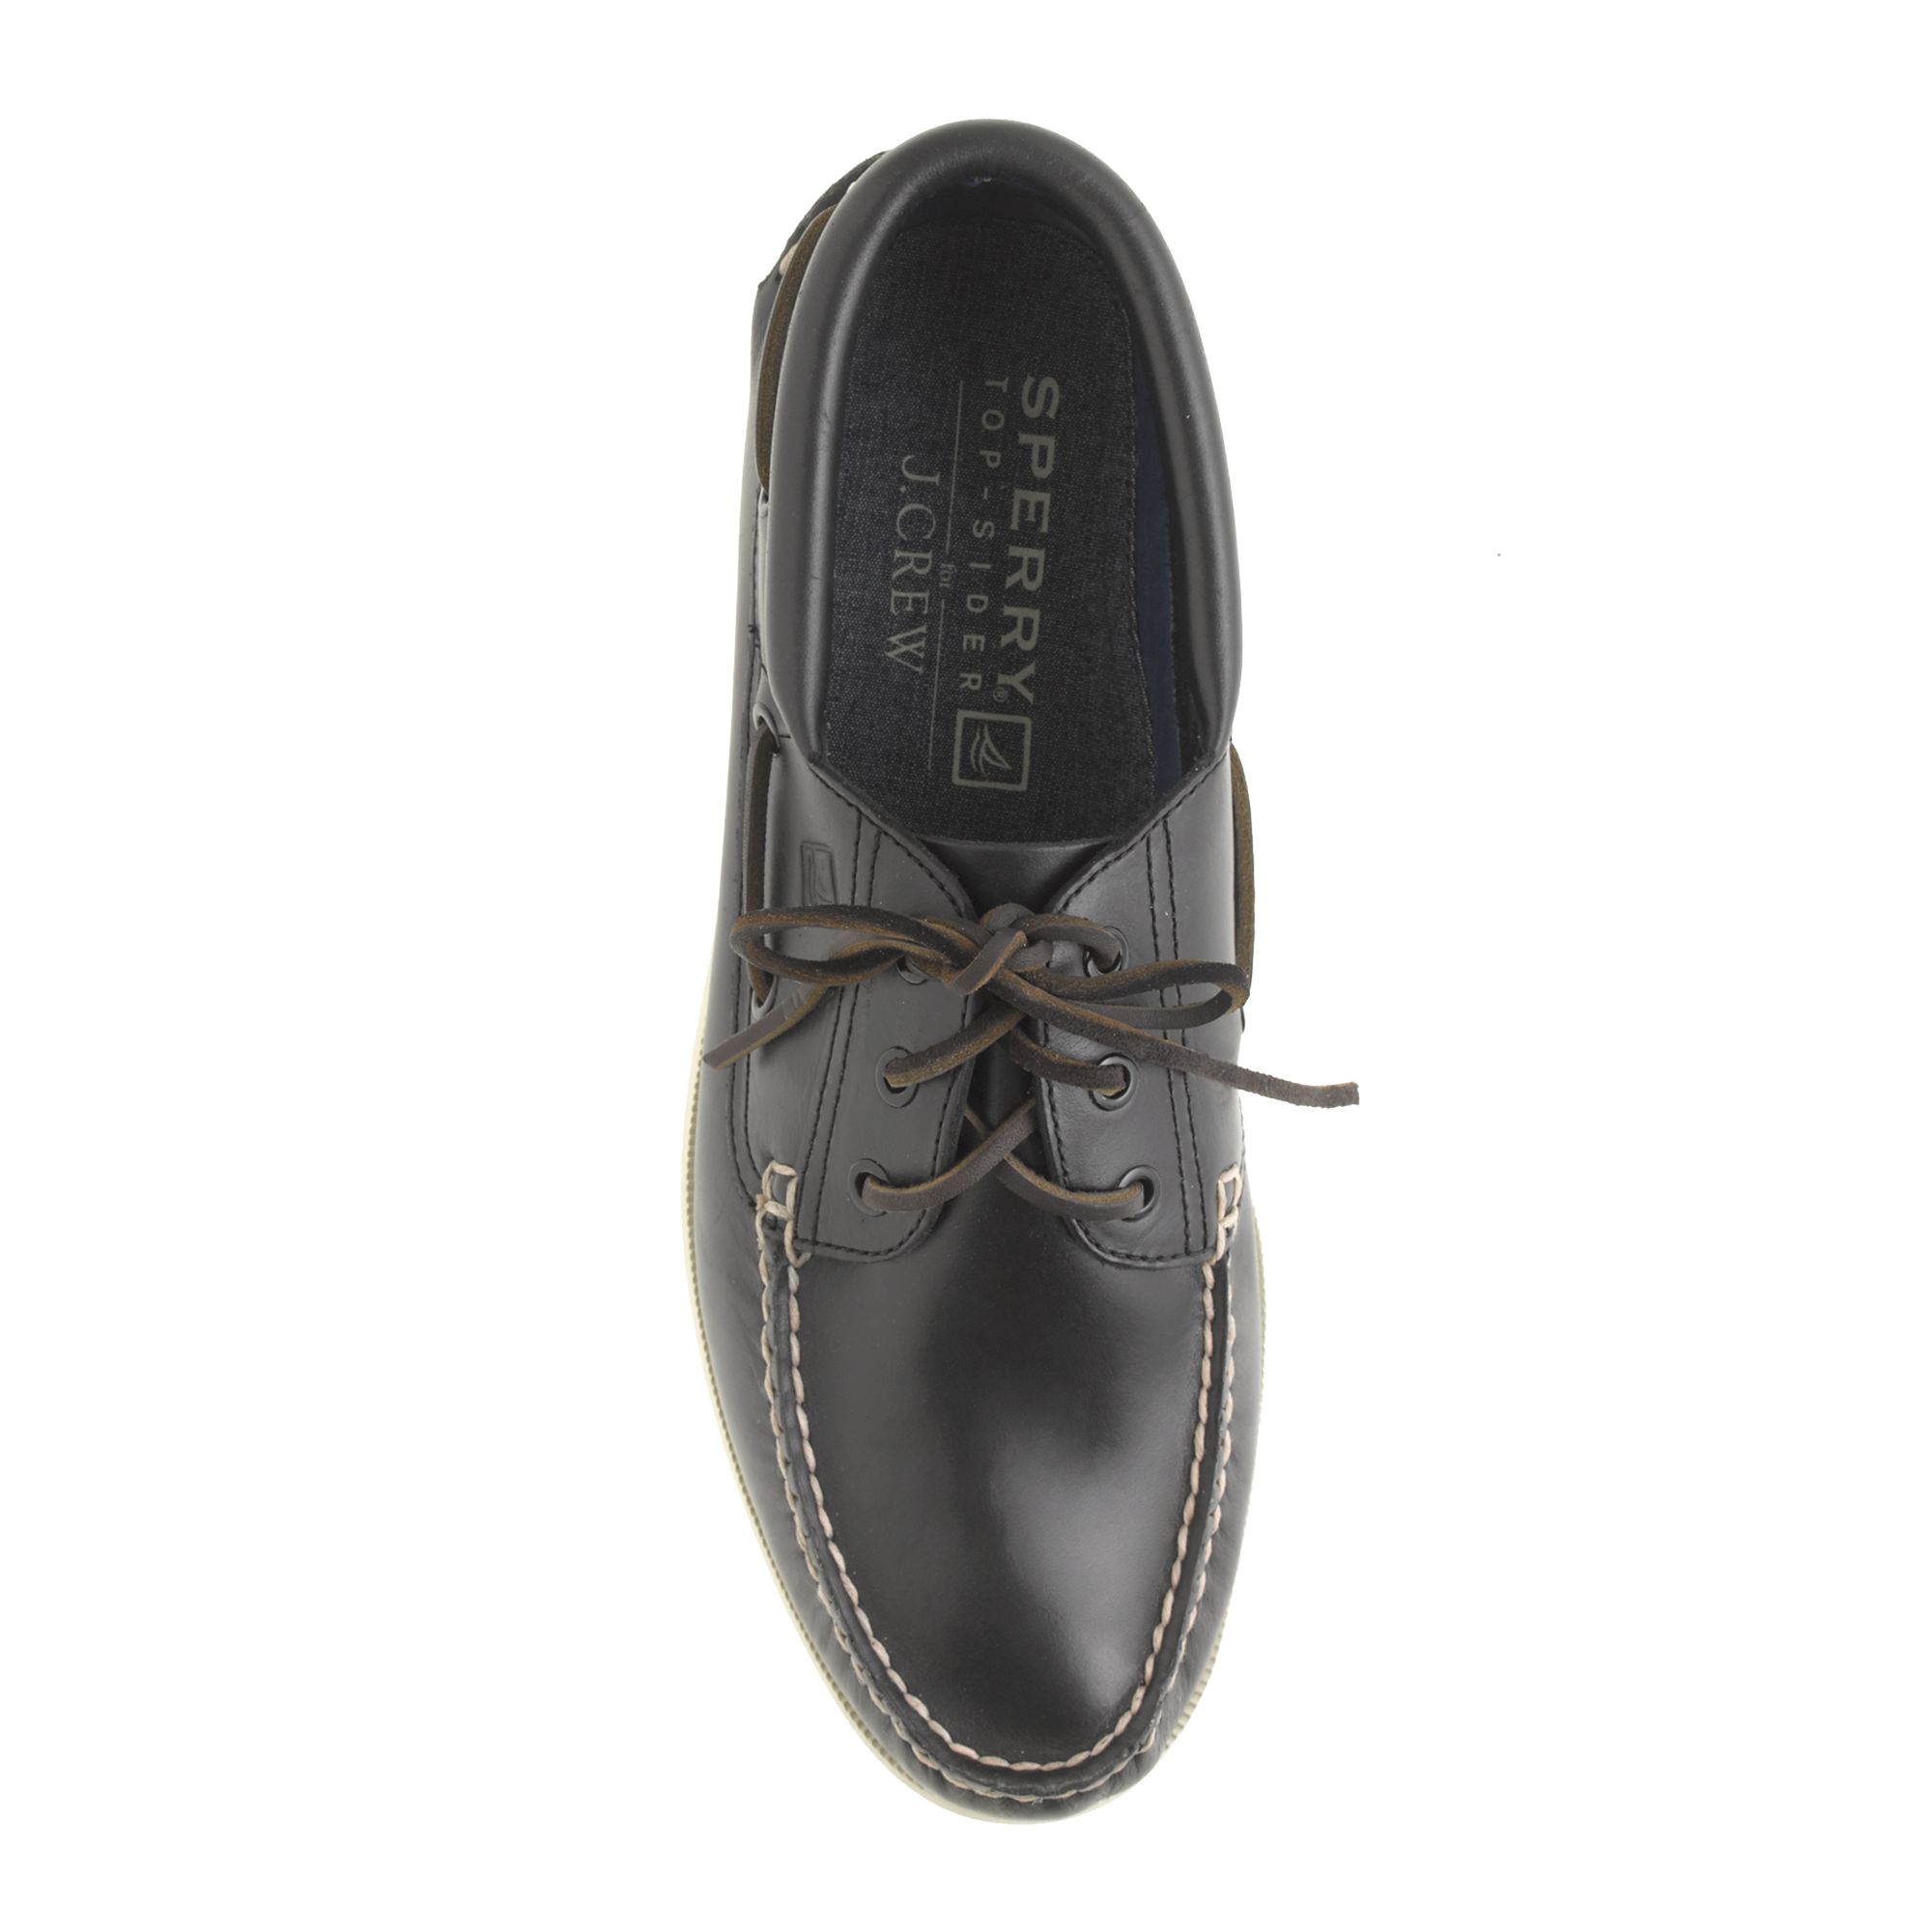 J.crew Sperry Top-sider Authentic Original 3-eye Boat Shoes in Black ...